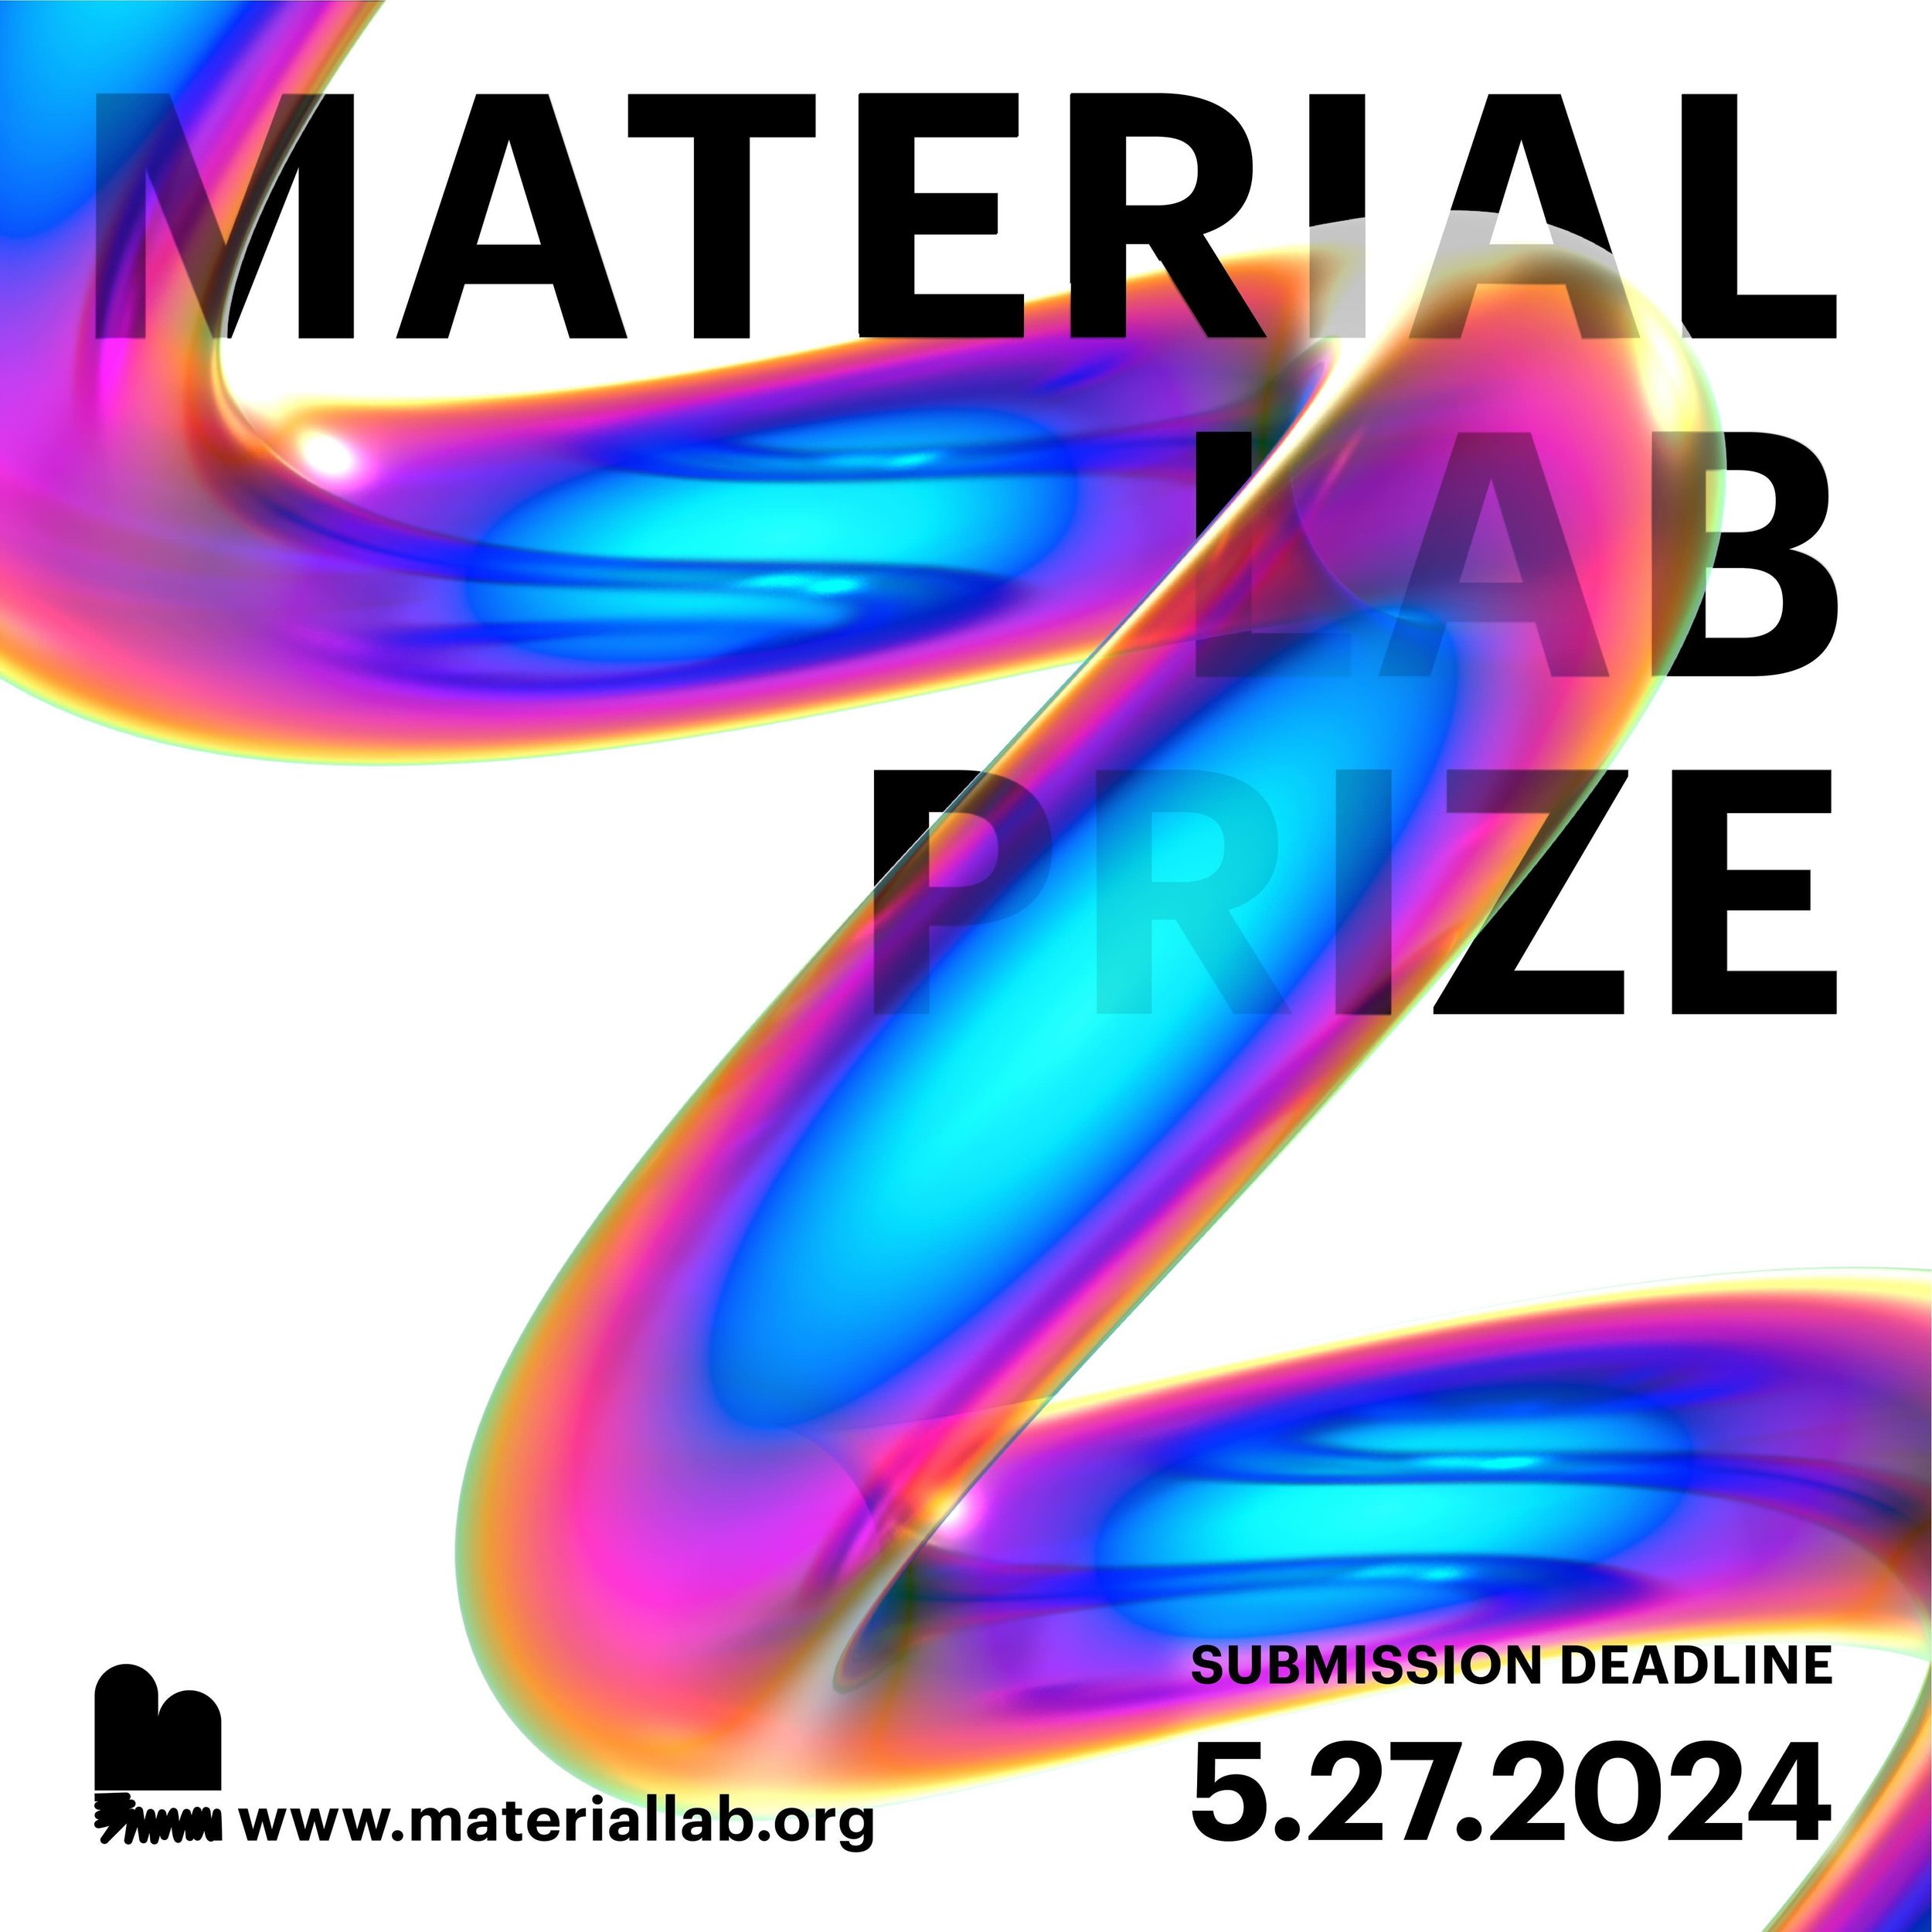 Now in it&rsquo;s fifth year, The Material Lab Prize is a $1,000 prize awarded annually by the Material Lab at Pratt Institute&rsquo;s School of Design to a student designer whose work incorporates repurposed waste and material exploration. The prize